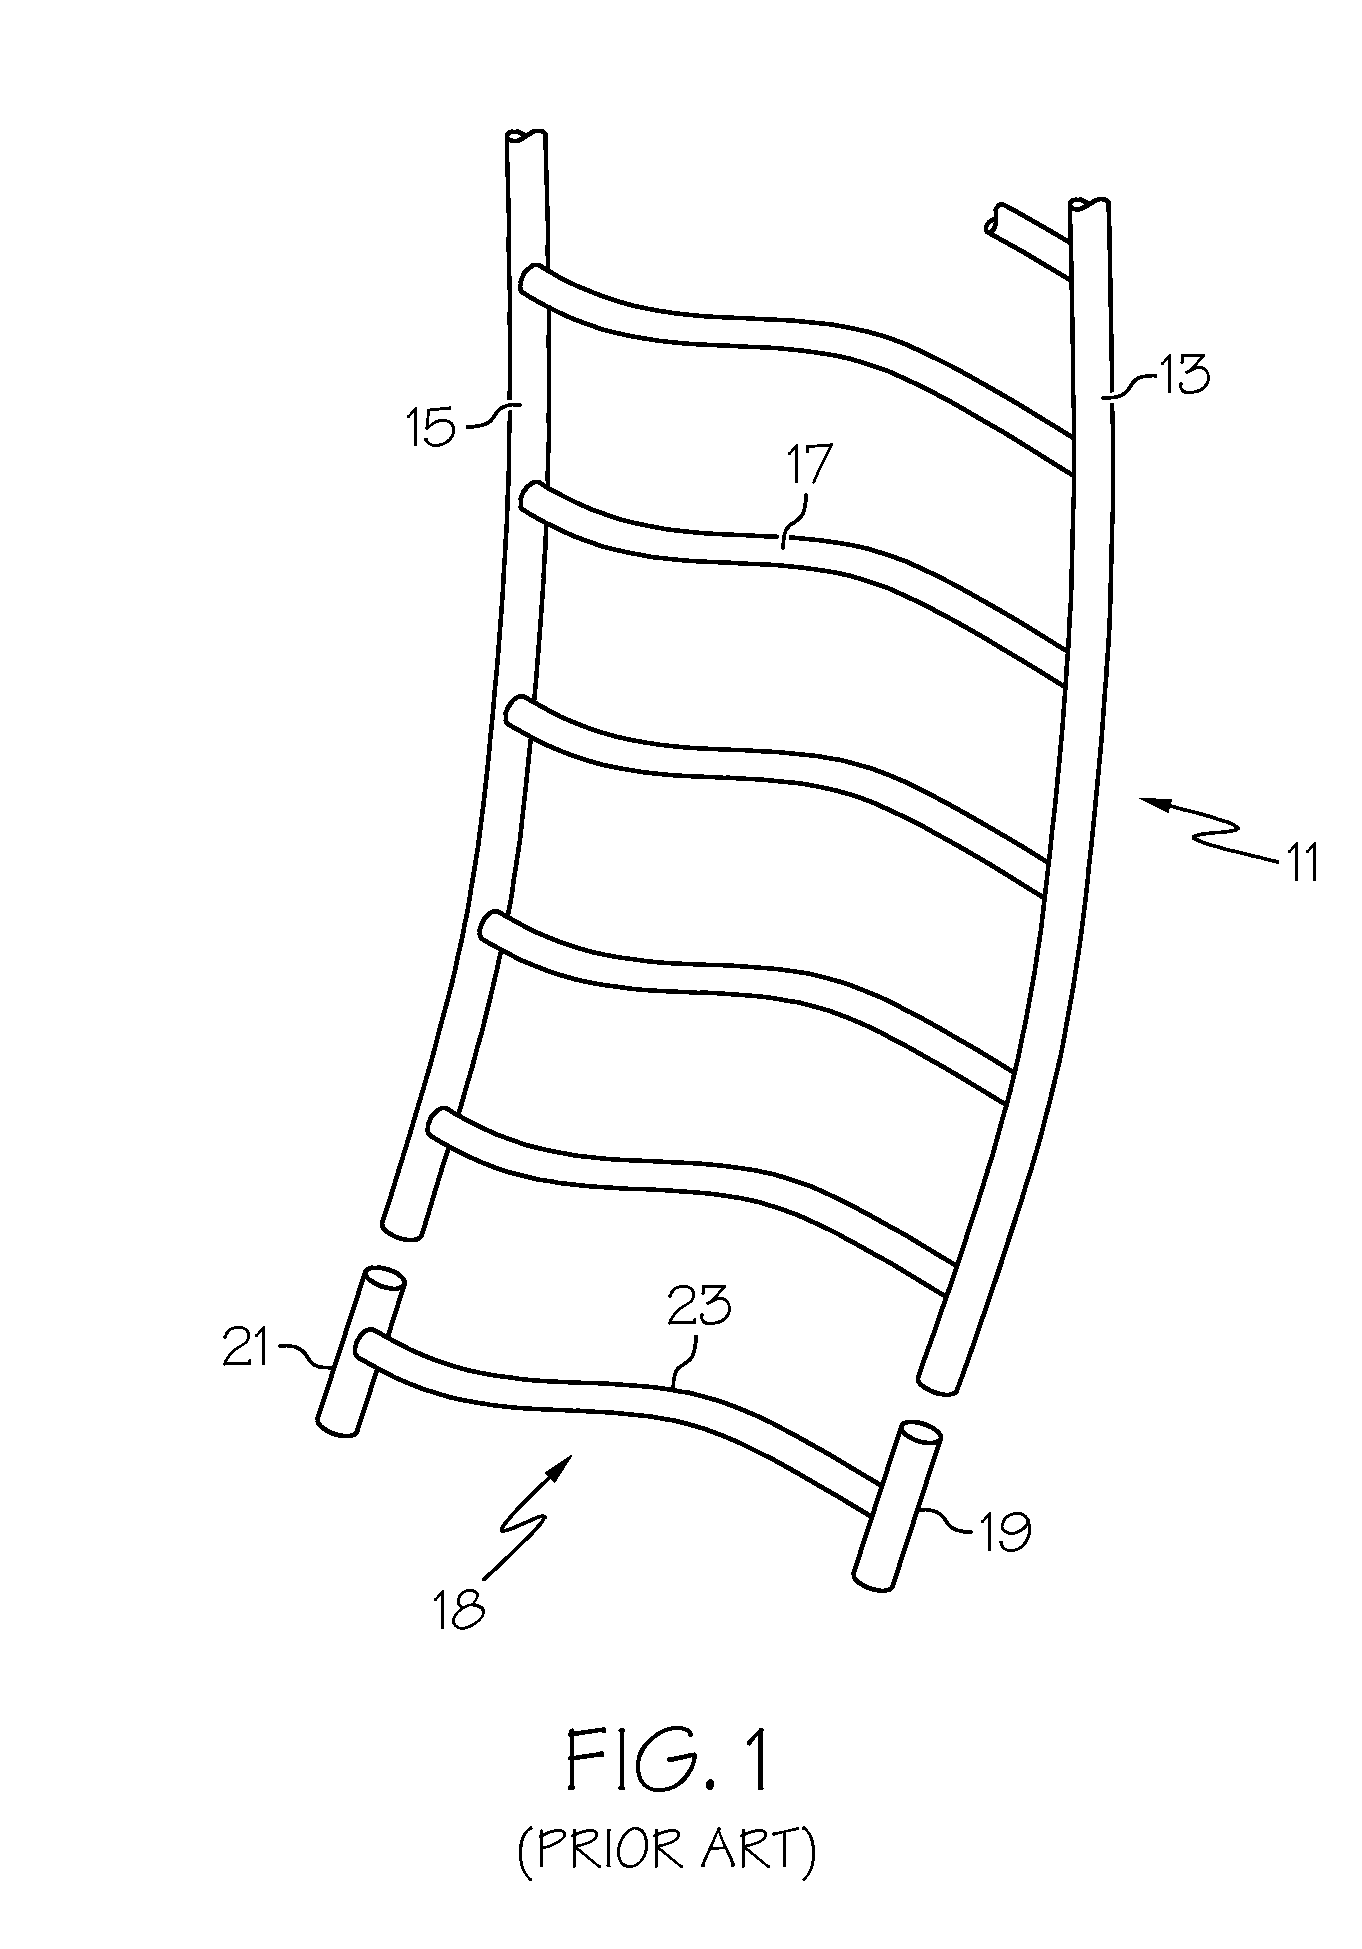 Fastener stock and device for use in dispensing plastic fasteners therefrom